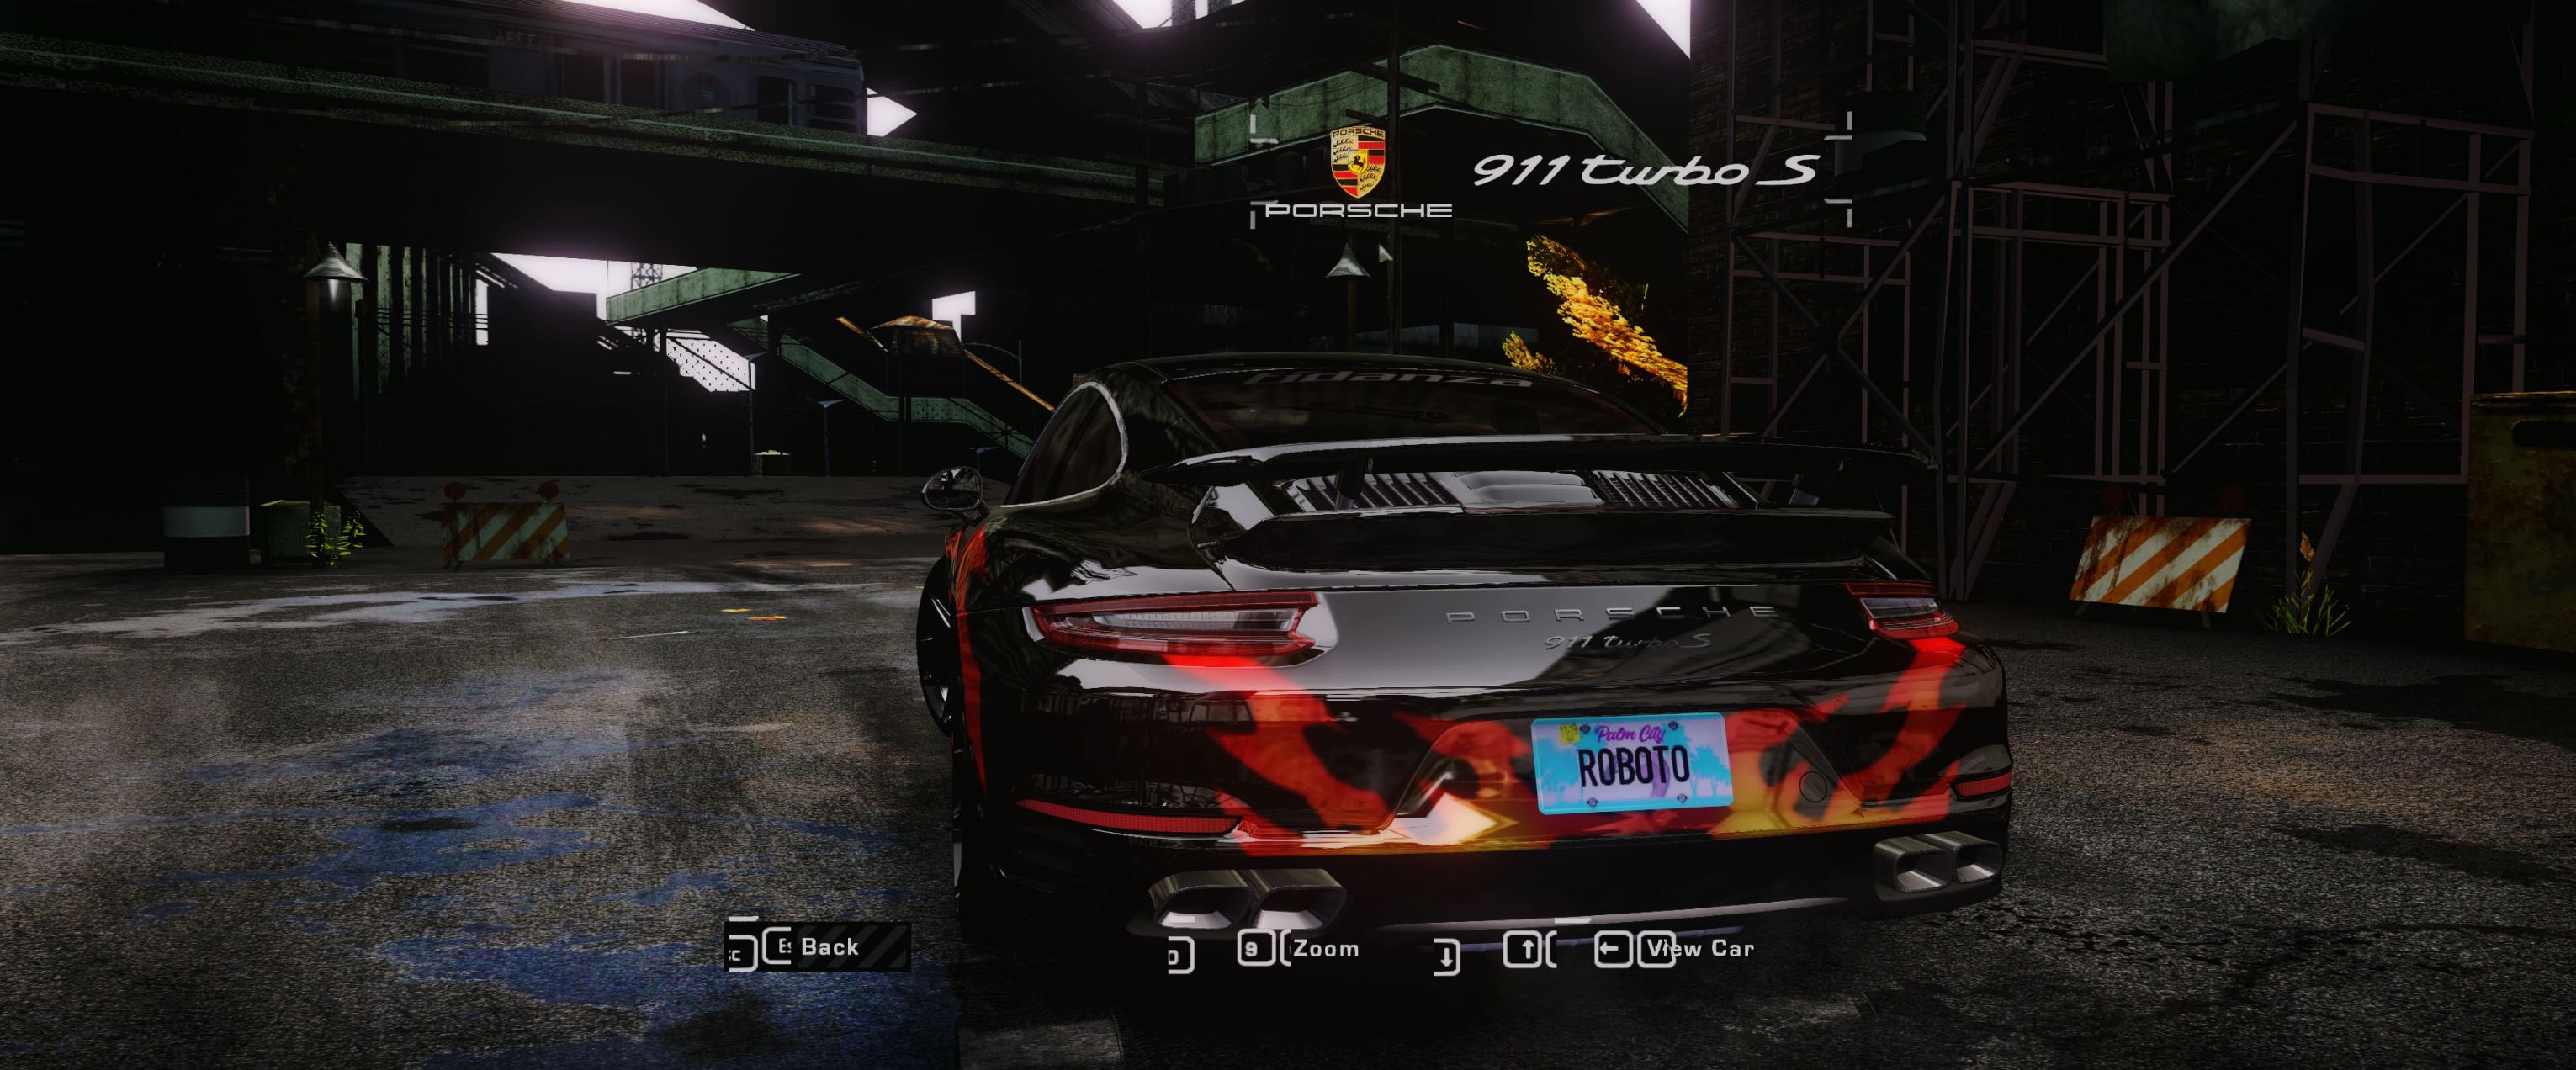 Need For Speed Most Wanted NFS Heat License Plate